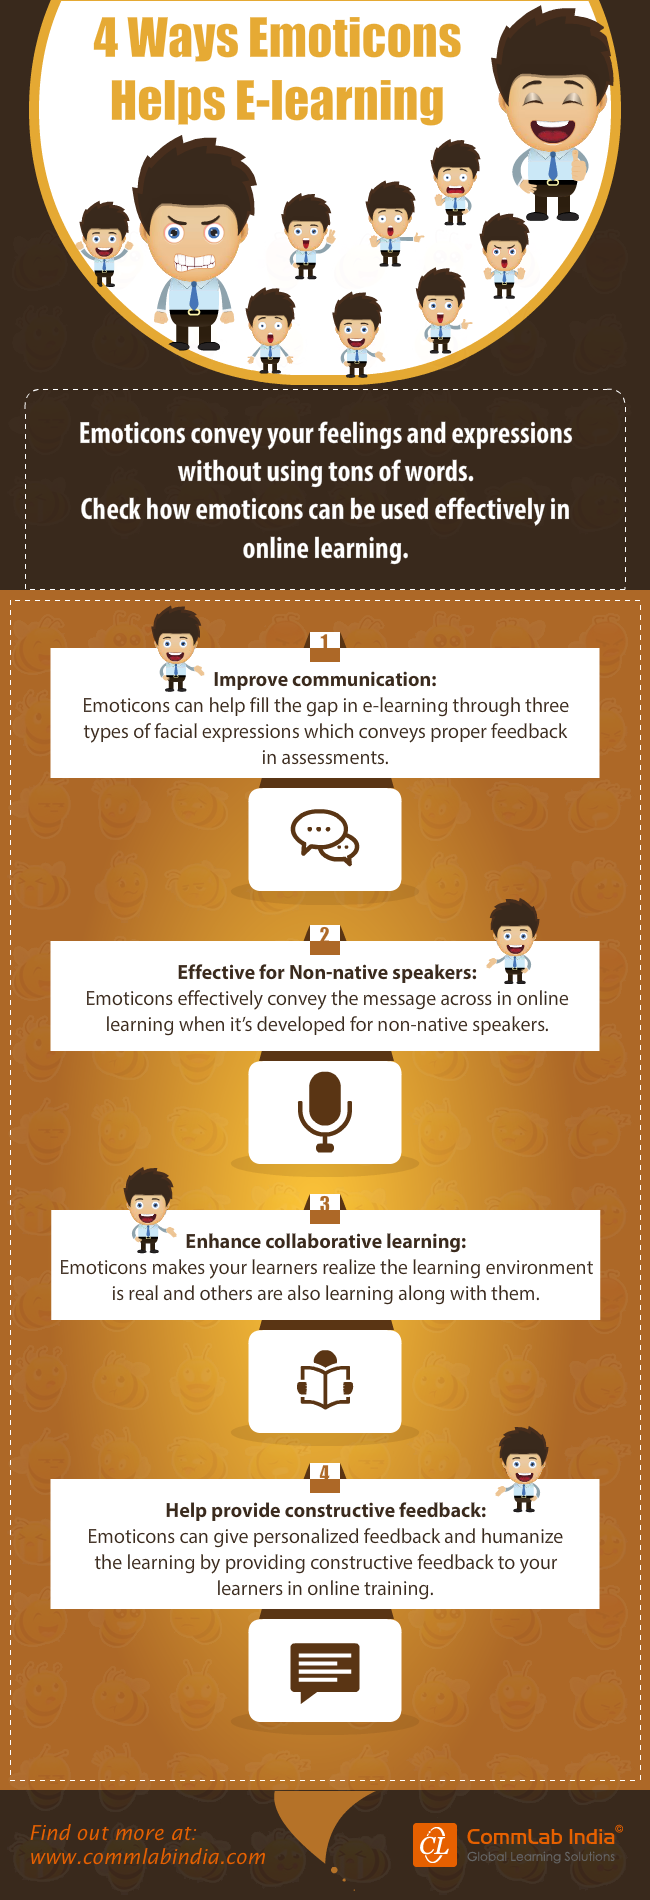 4 Ways Emoticons Helps E-Learning [Infographic]